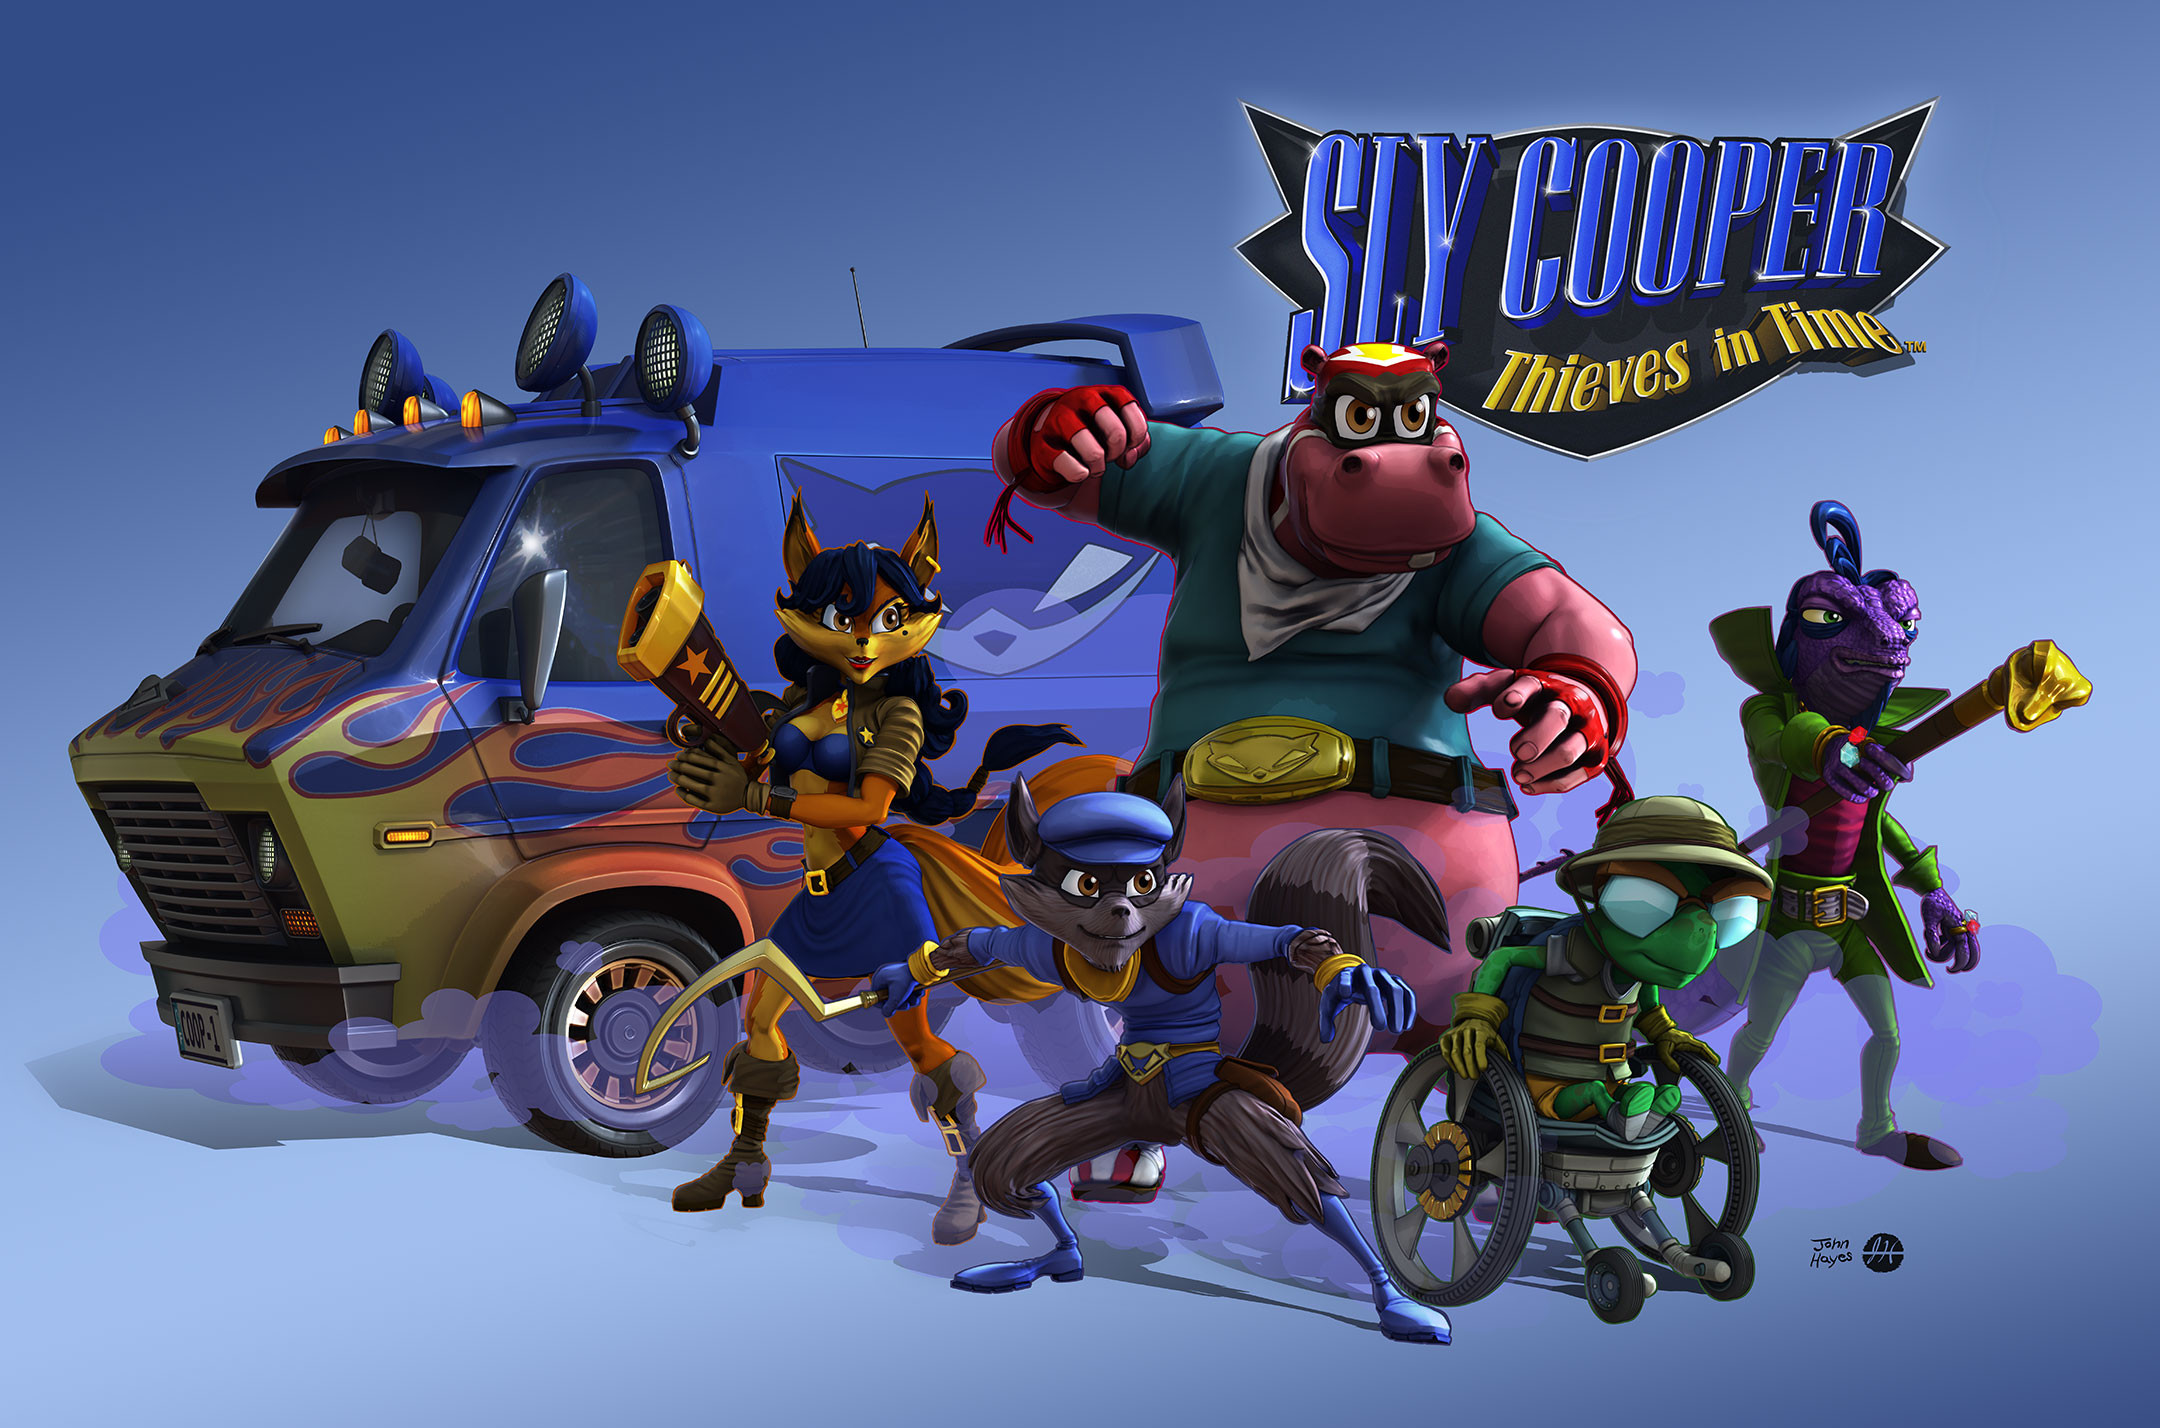 ArtStation - Sly Cooper from the game Sly Cooper: Thieves in Time